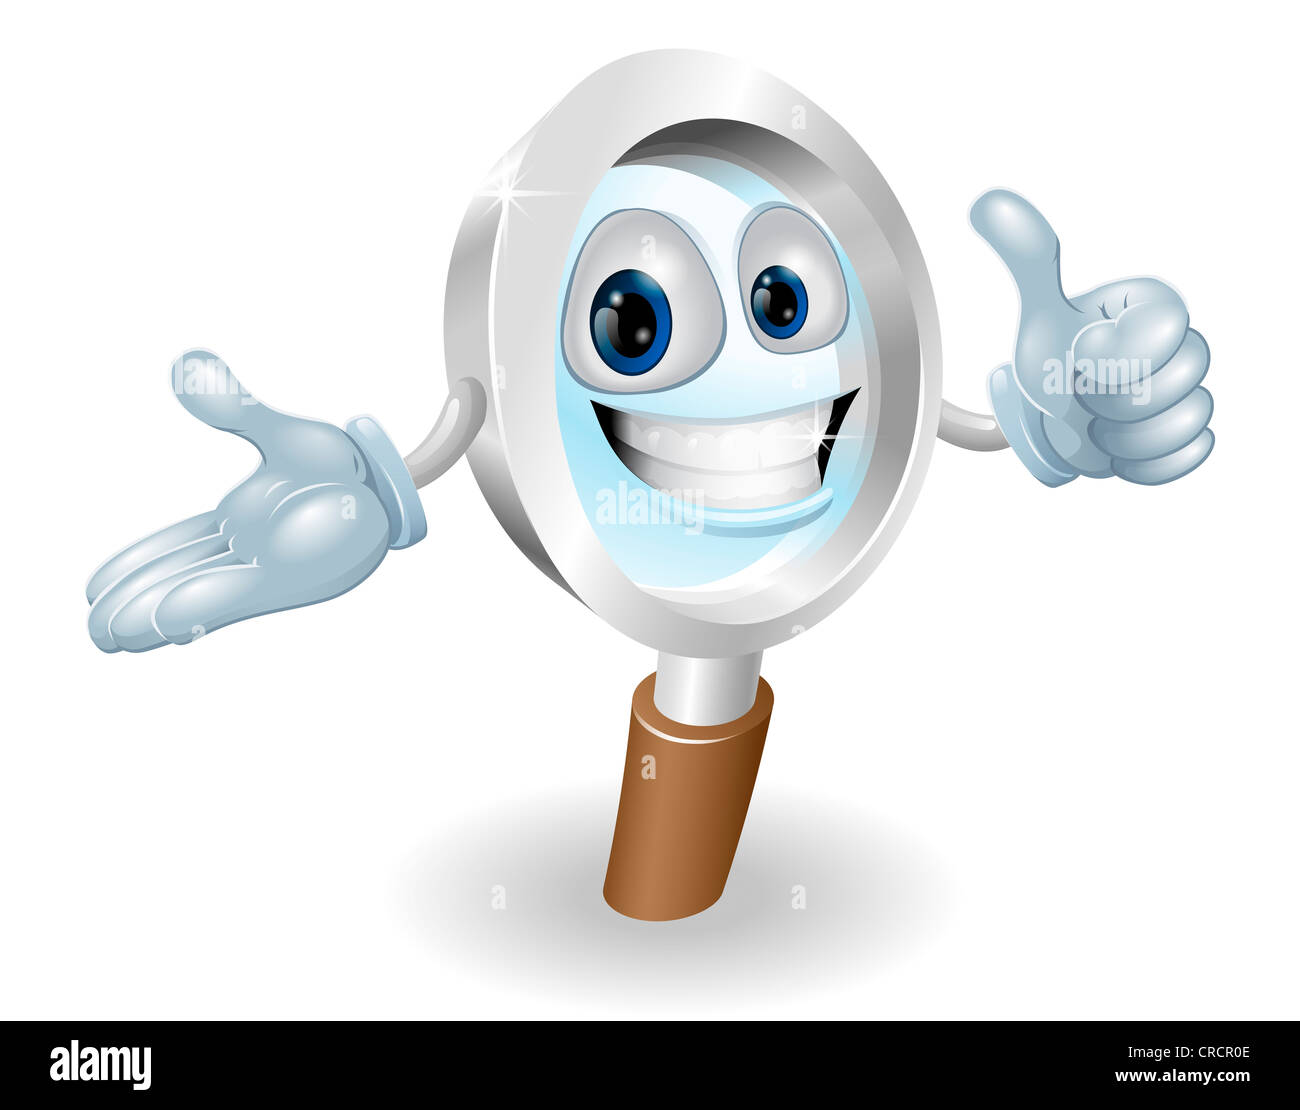 Search magnifying glass character illustration, he'll help you find anything you need. Stock Photo